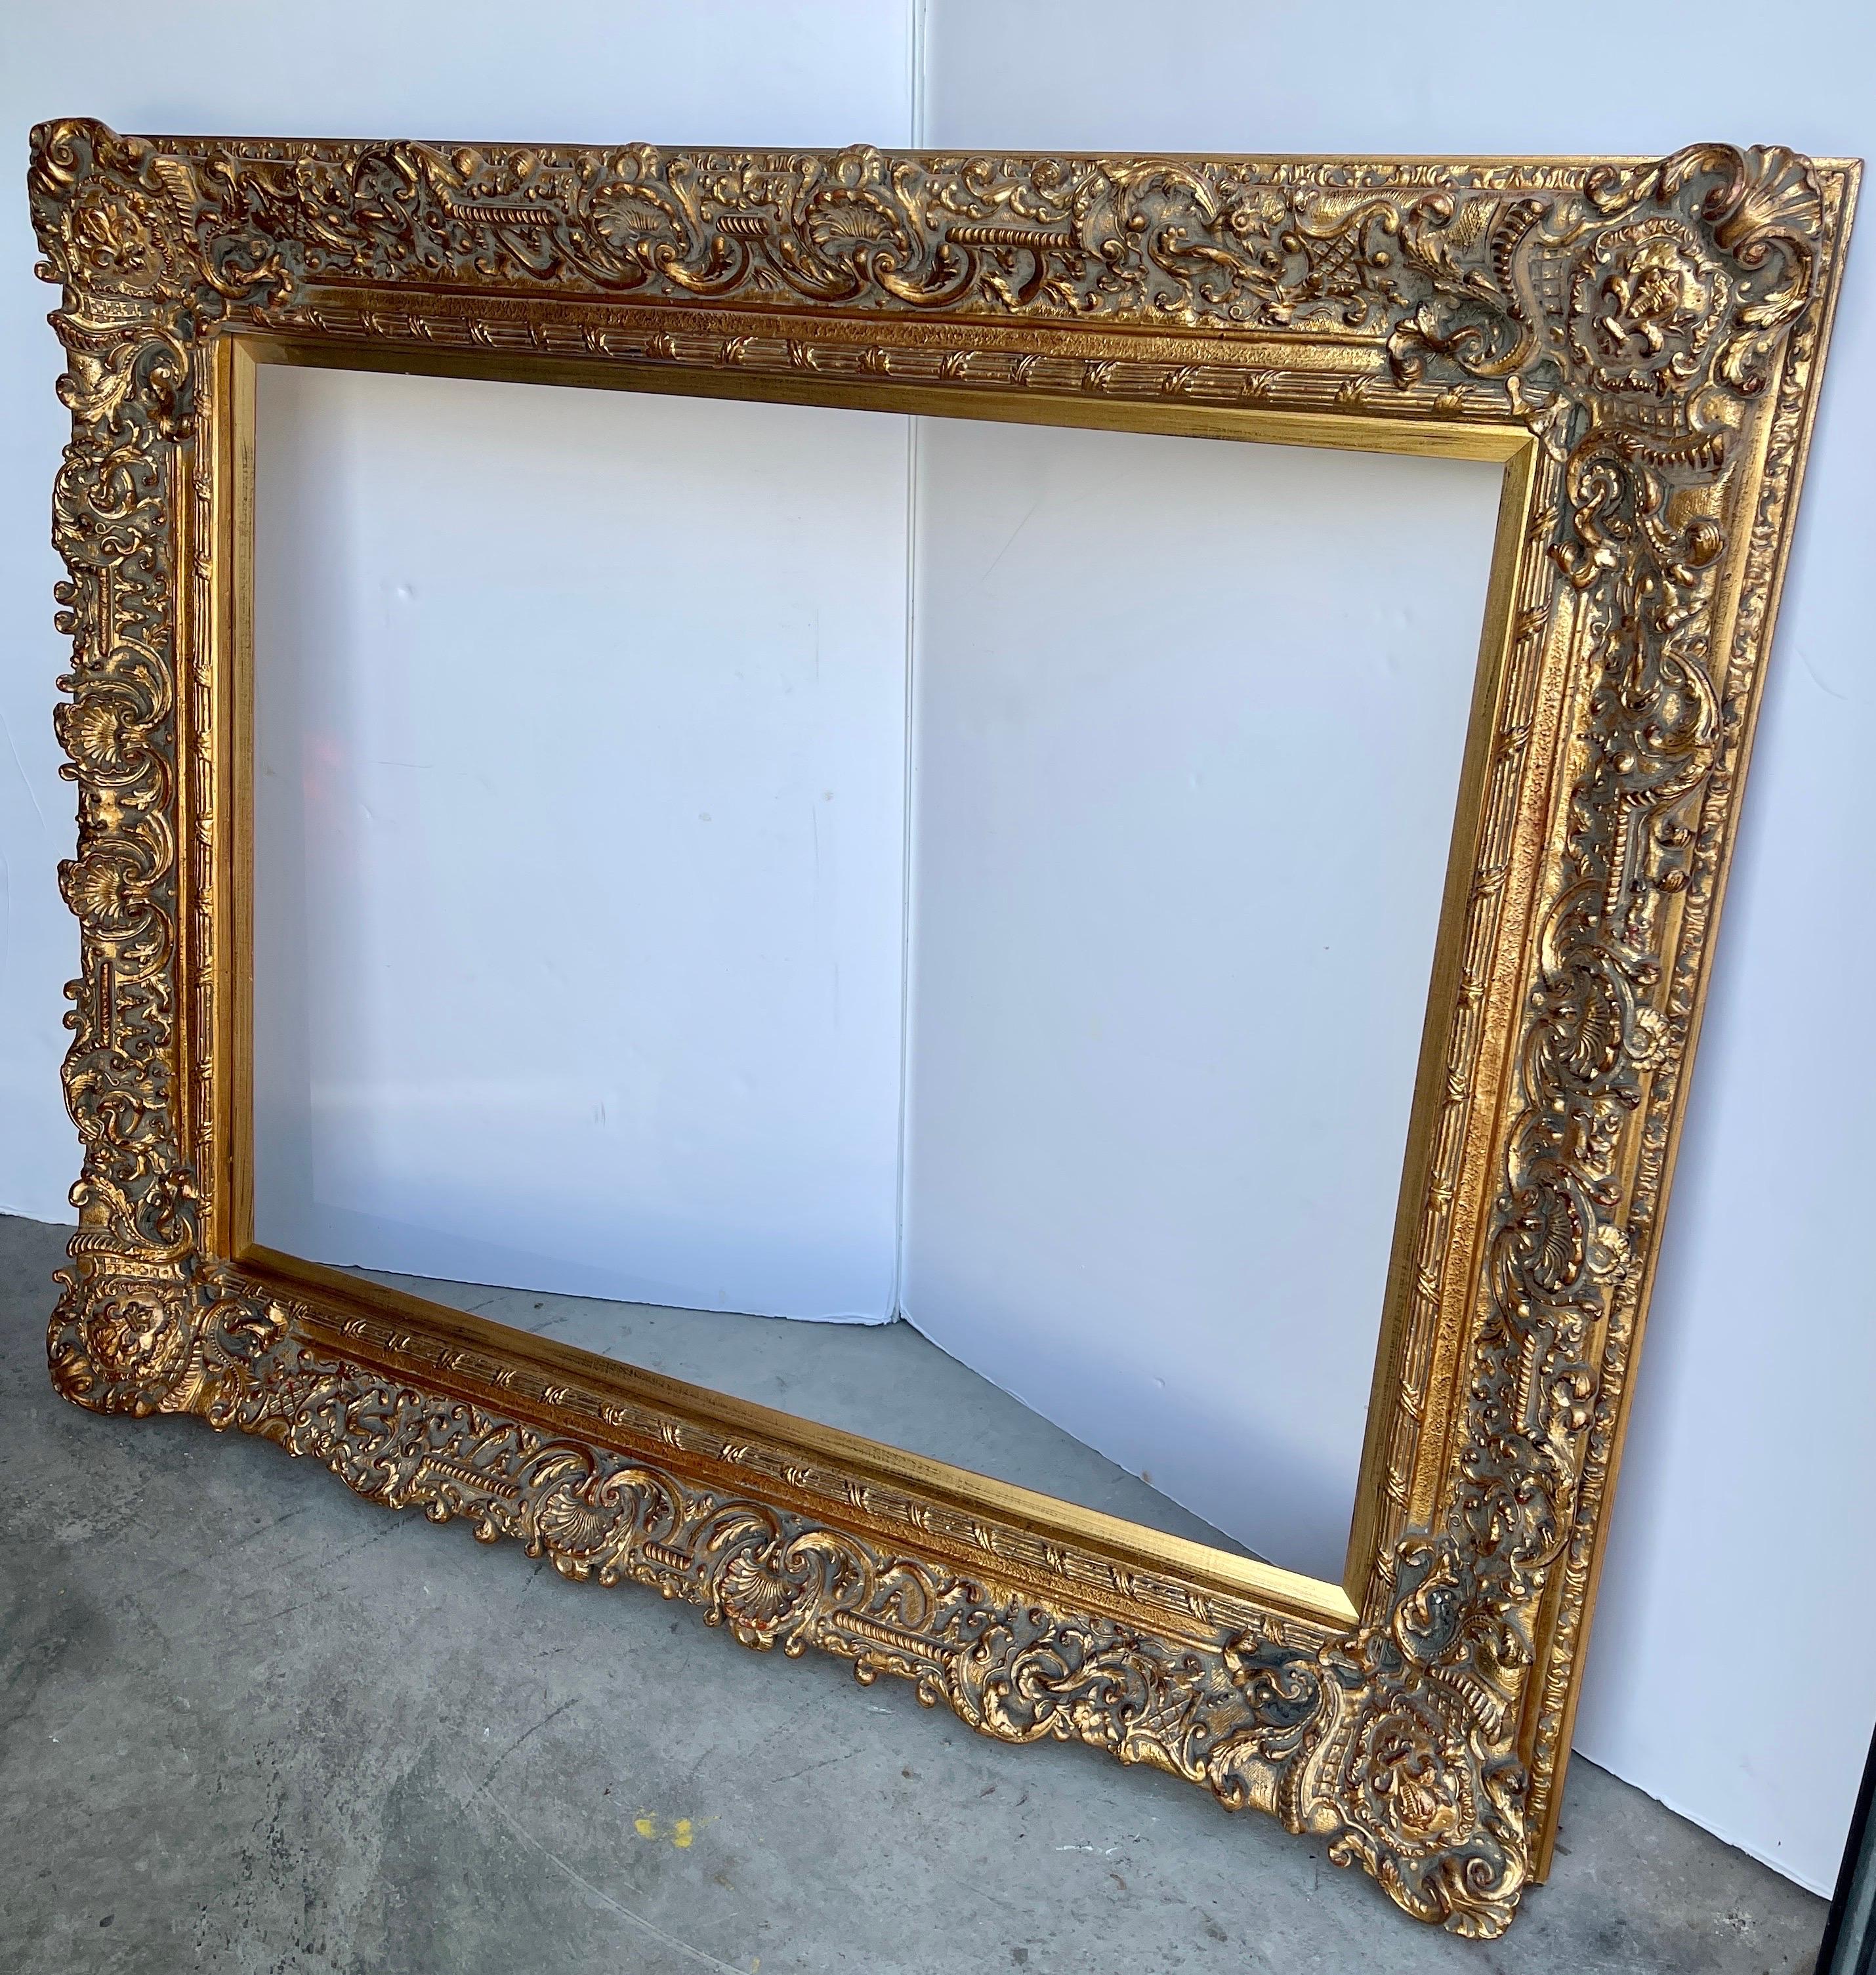 Gesso 20th Century Large Ornate Carved Gilt Wood Frame, French Rococo Style 